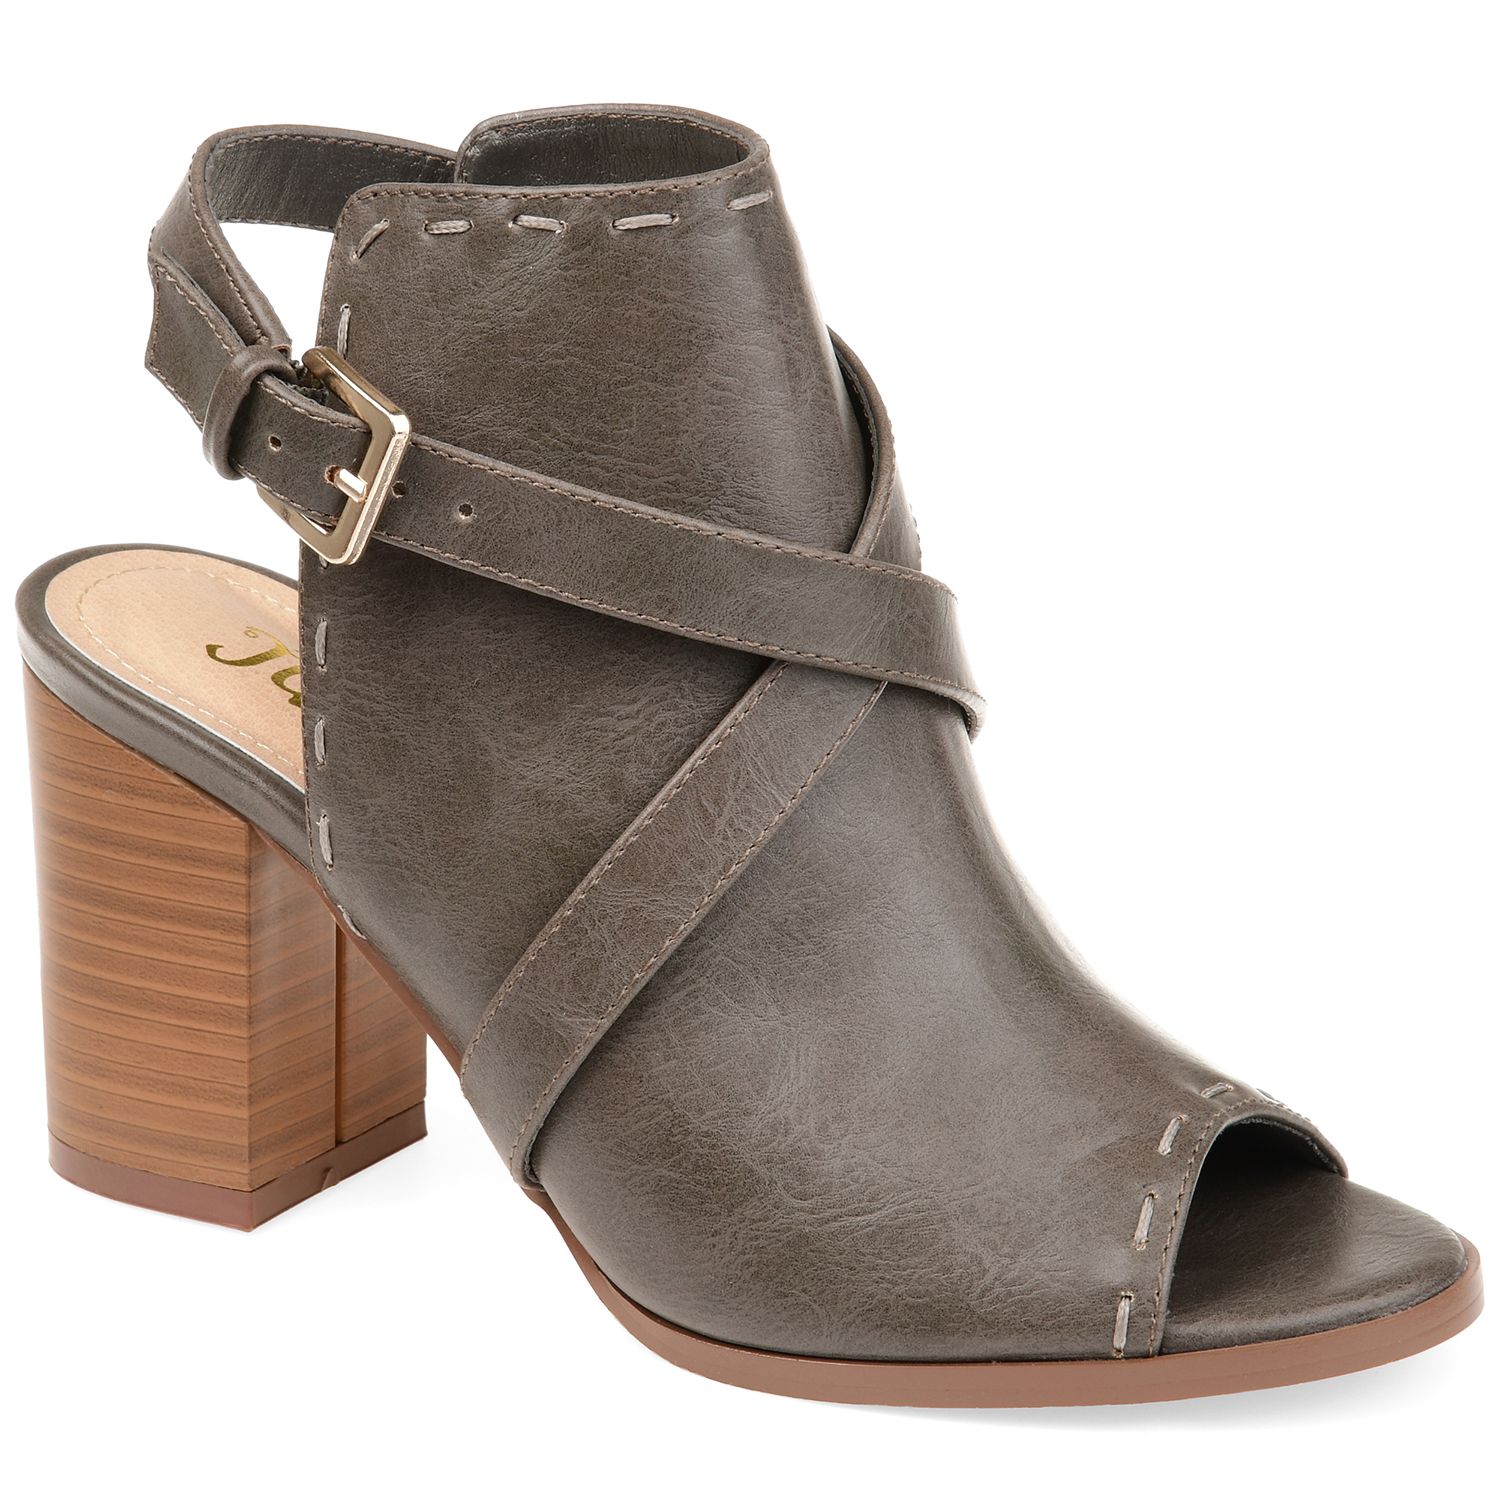 journee collection strap women's ankle boots